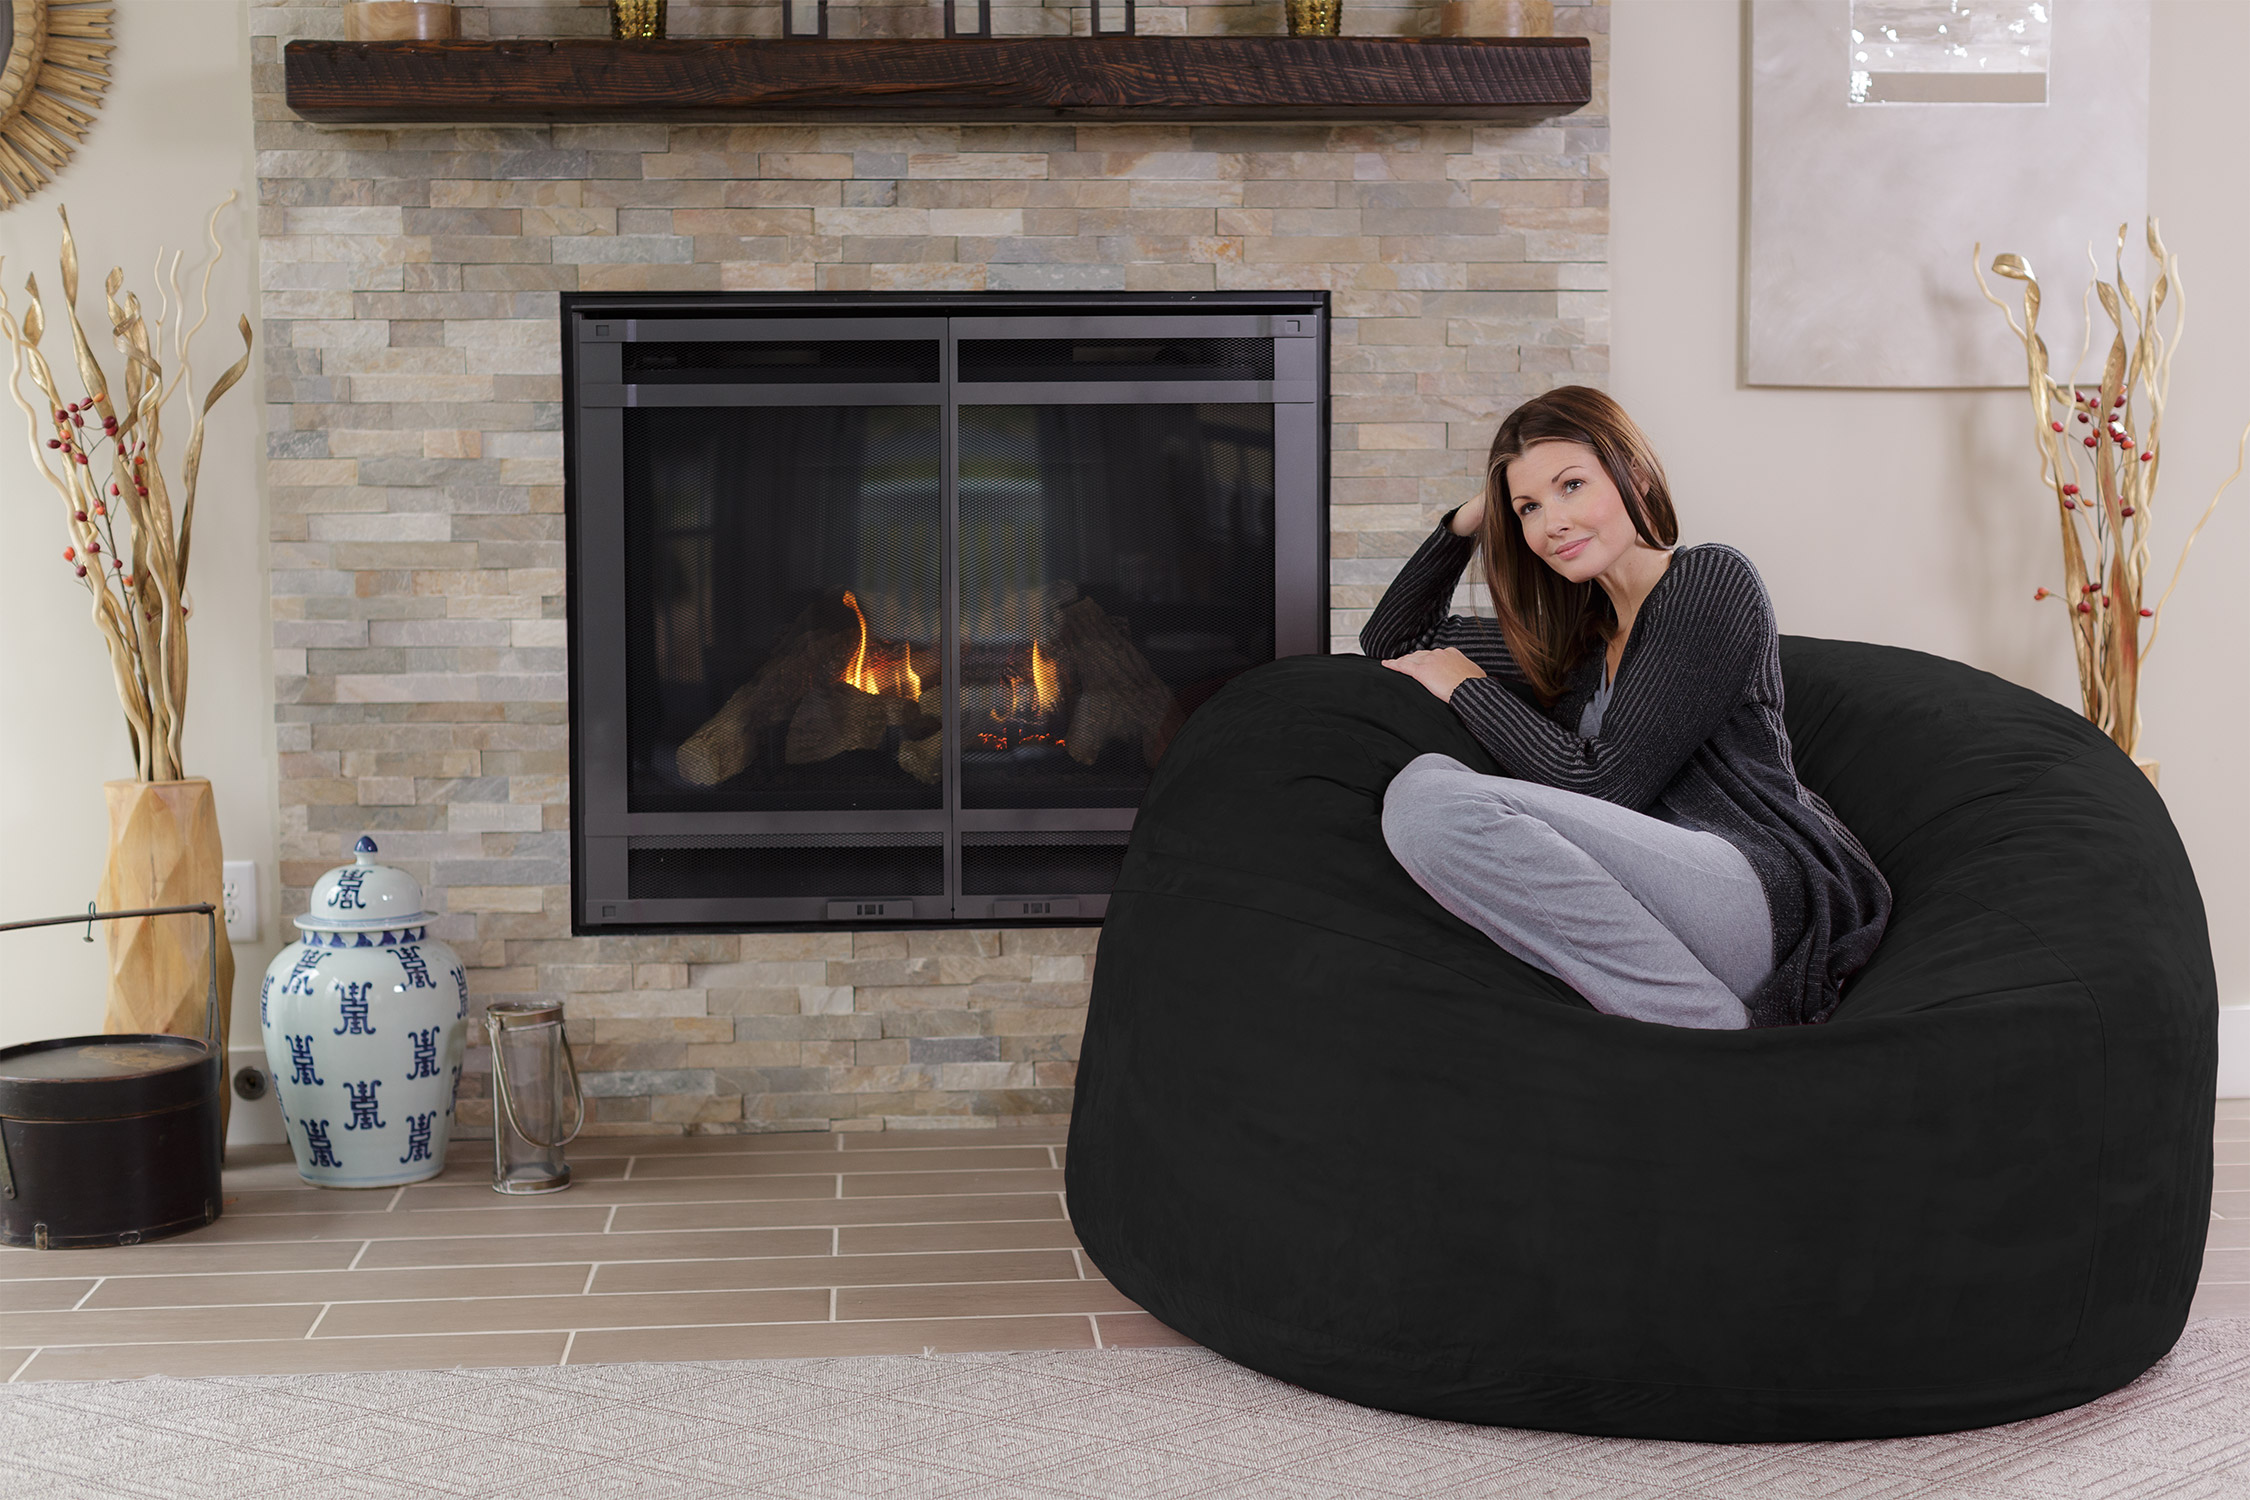 Chill Sack Bean Bag Chair, Memory Foam Lounger with Microsuede Cover, Kids, Adults, 5 ft, Black - image 4 of 5